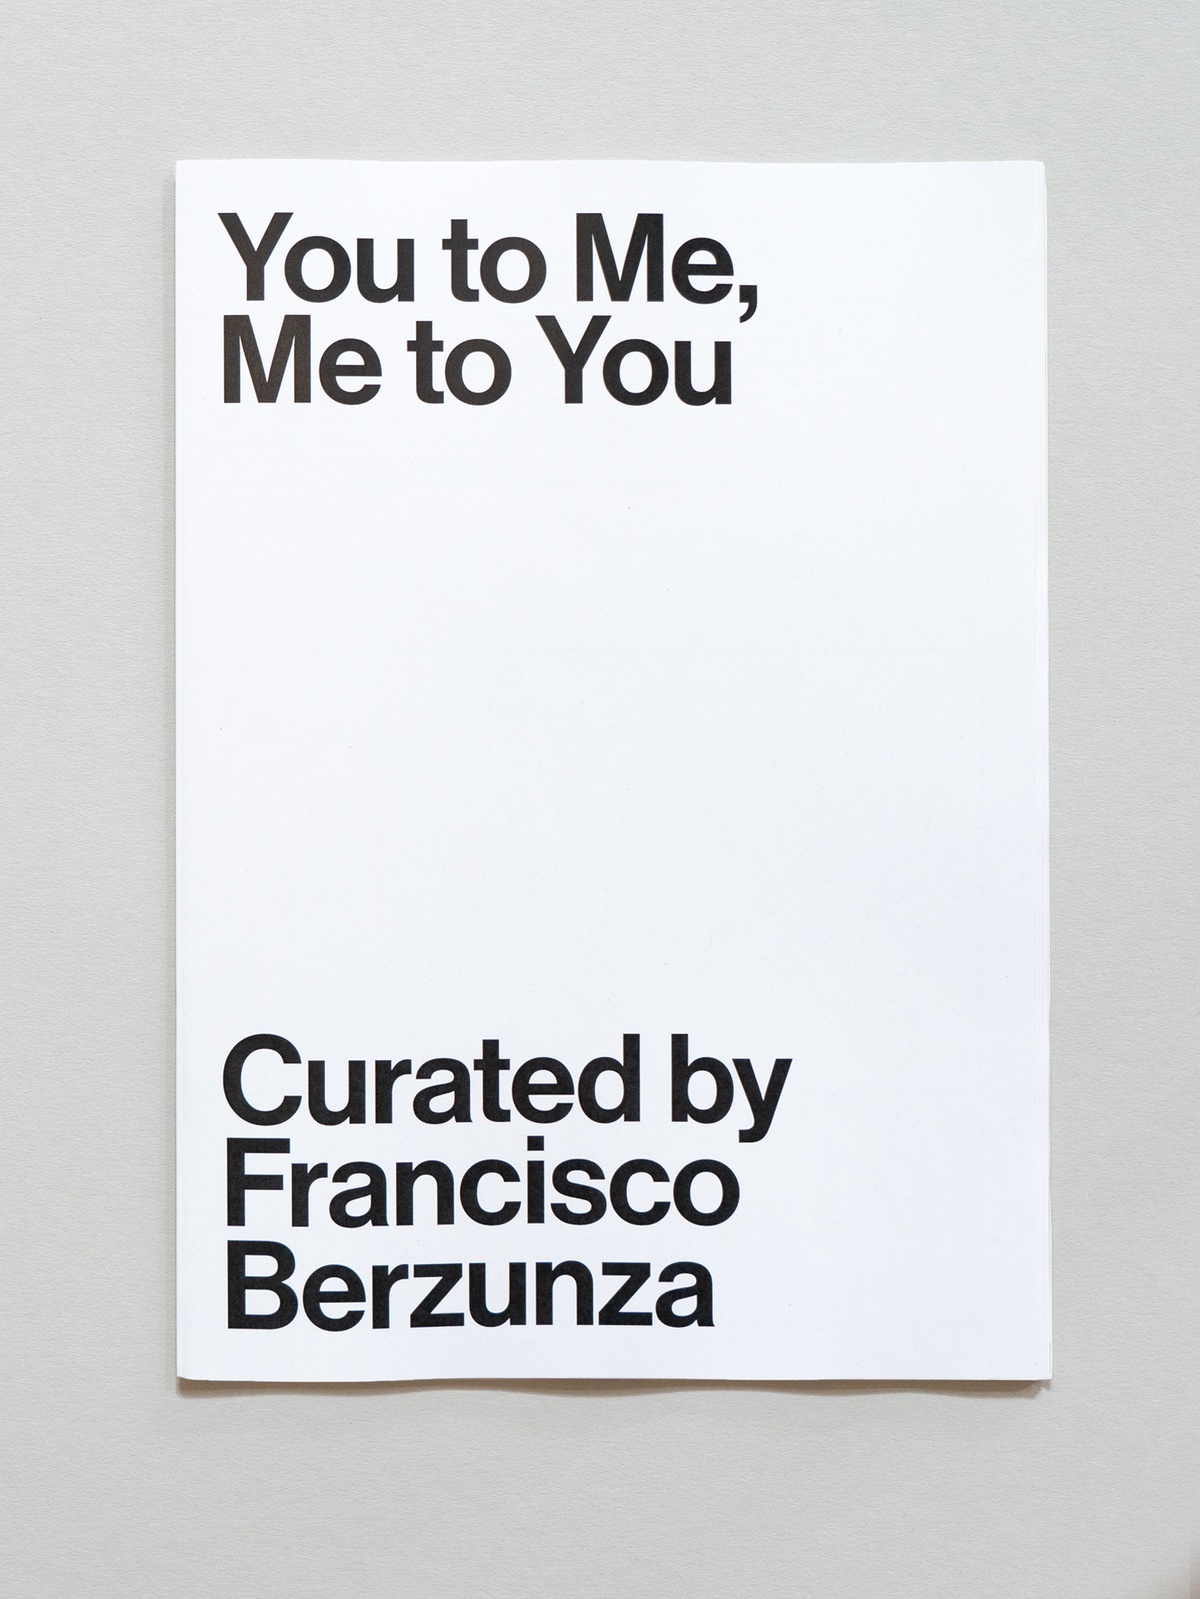 Photograph of the wayfinder publication for You to Me, Me to You curated by Francisco Berzunza in A4 Arts Foundation's Gallery.
